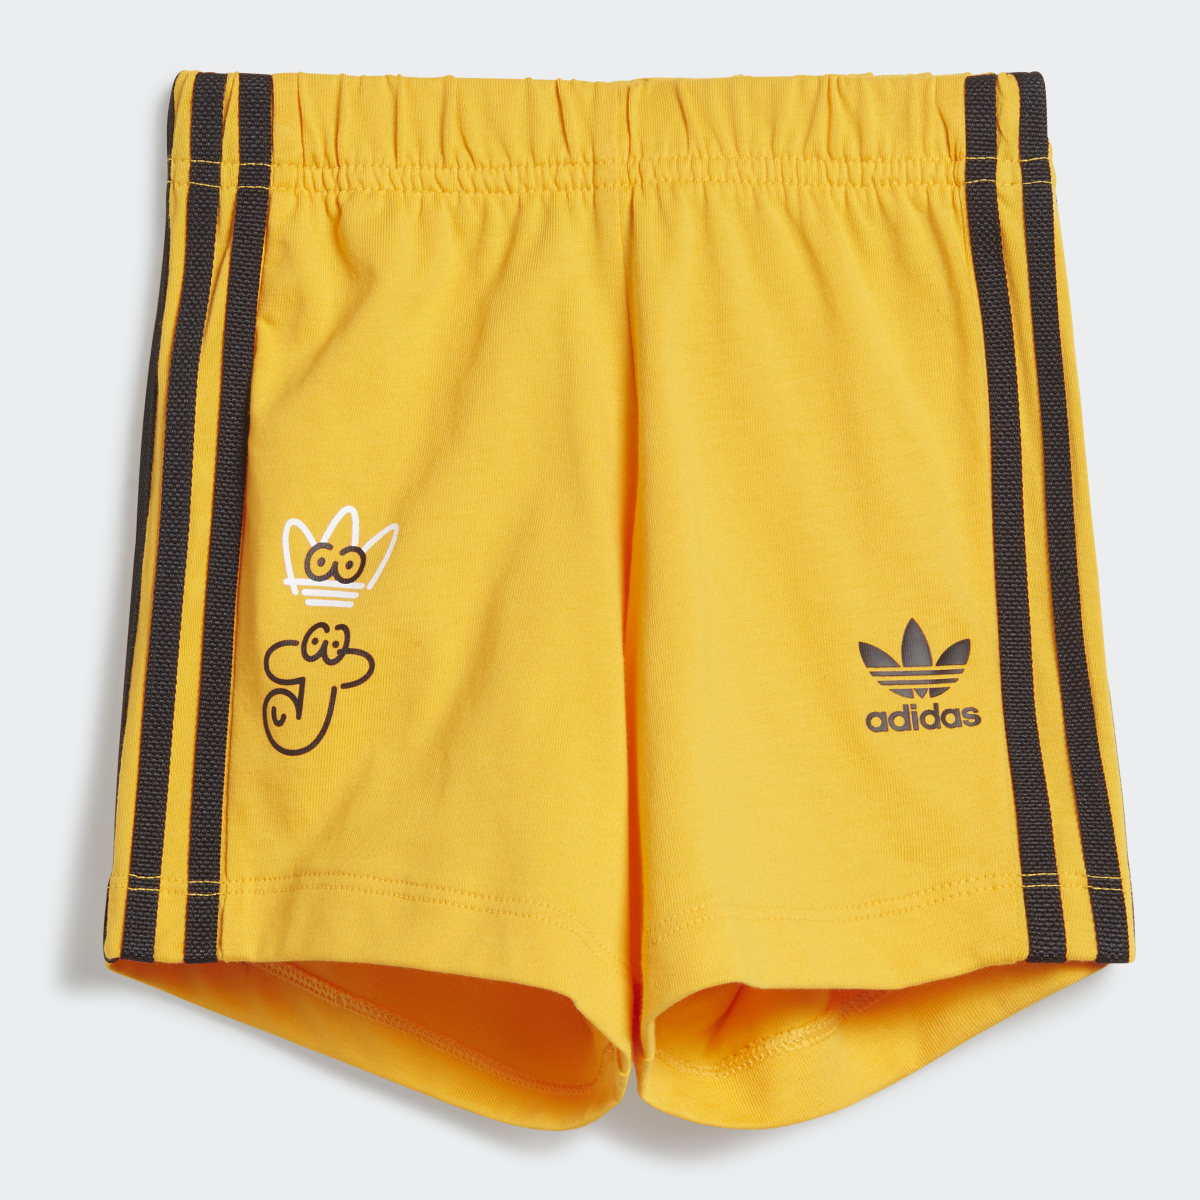 Adidas Completo adidas x James Jarvis Shorts and Tee. 5